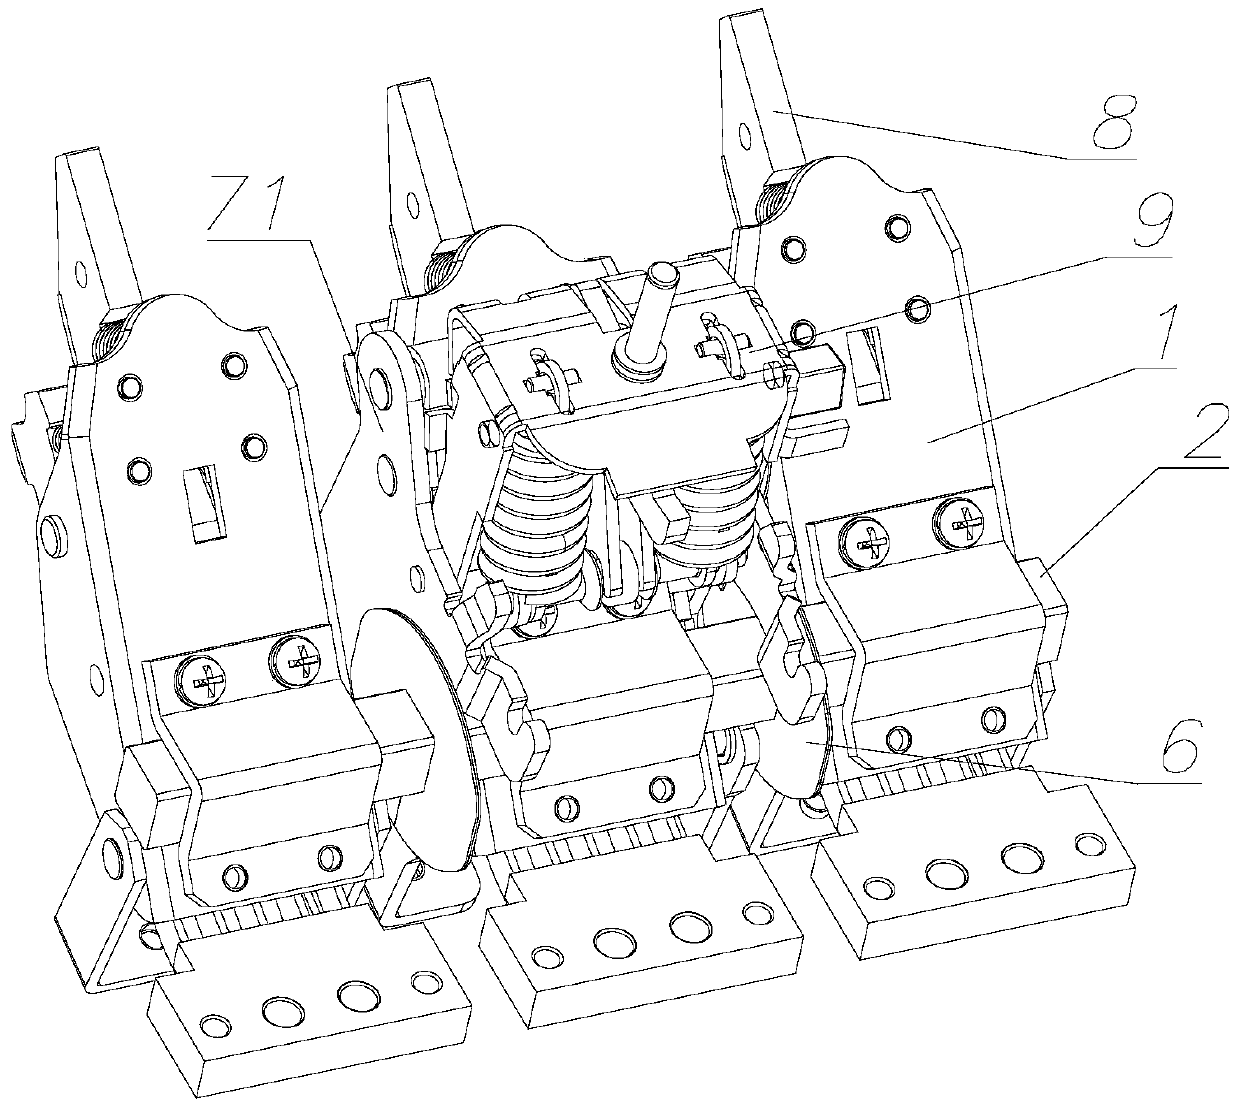 Rotary shaft device of circuit breaker